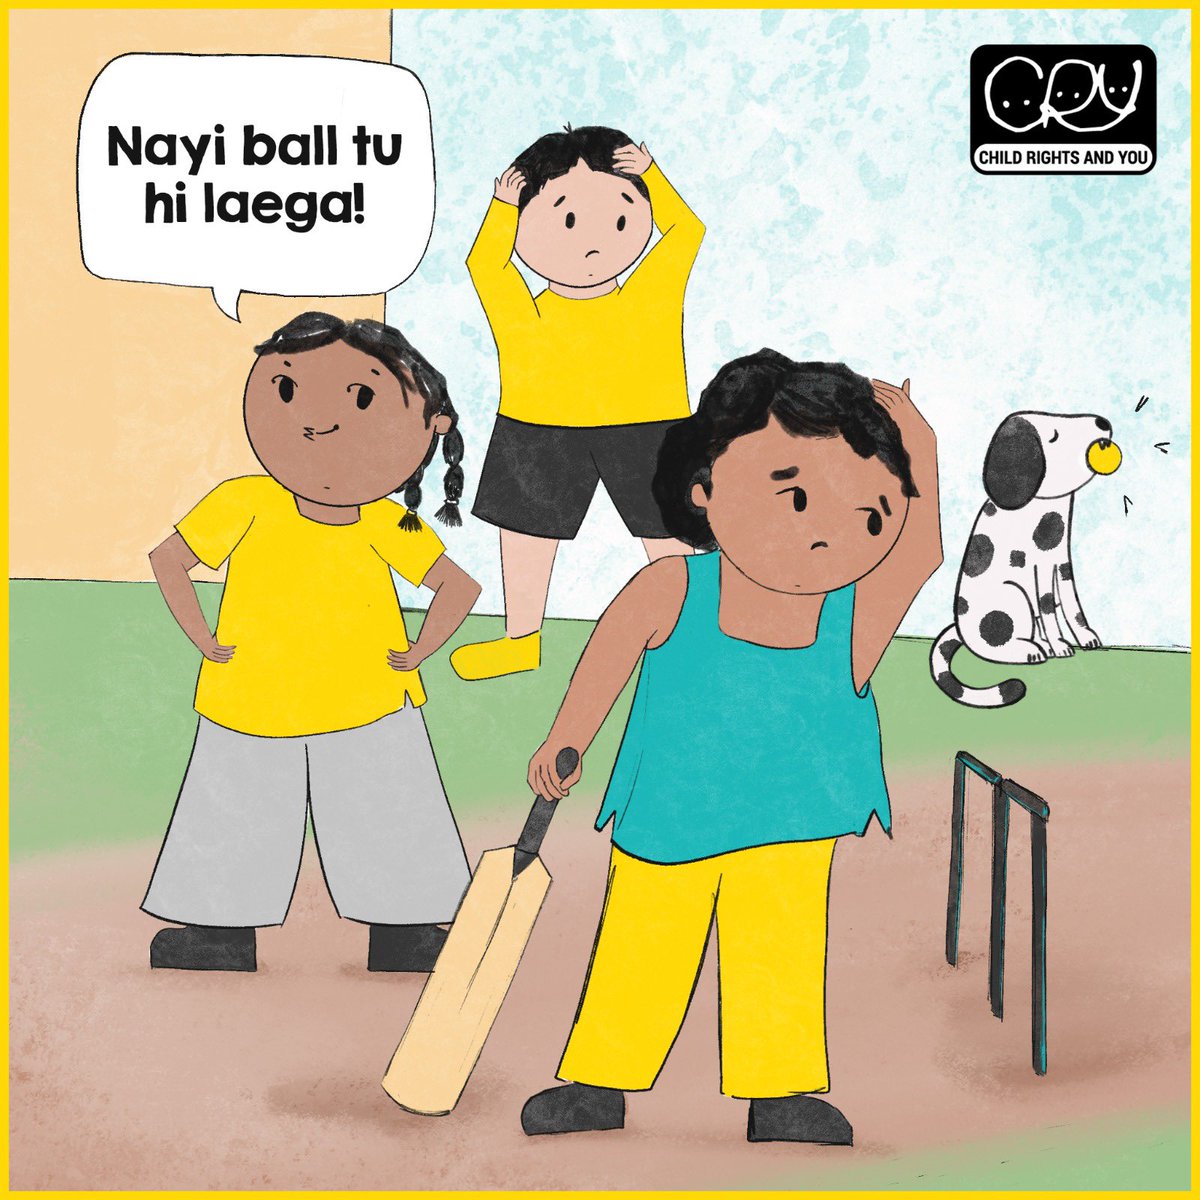 #ChildhoodCricketMemories
Were you the one who dreaded getting a new ball every time you played gully cricket? 🥲😅
.
.
.
🏷️ #CRYIndia #ChildRightsAndYou #ForOurChildren #GullyCricket #Nostalgia #Memories  #CricketSeason #IPLT20 #GameRules